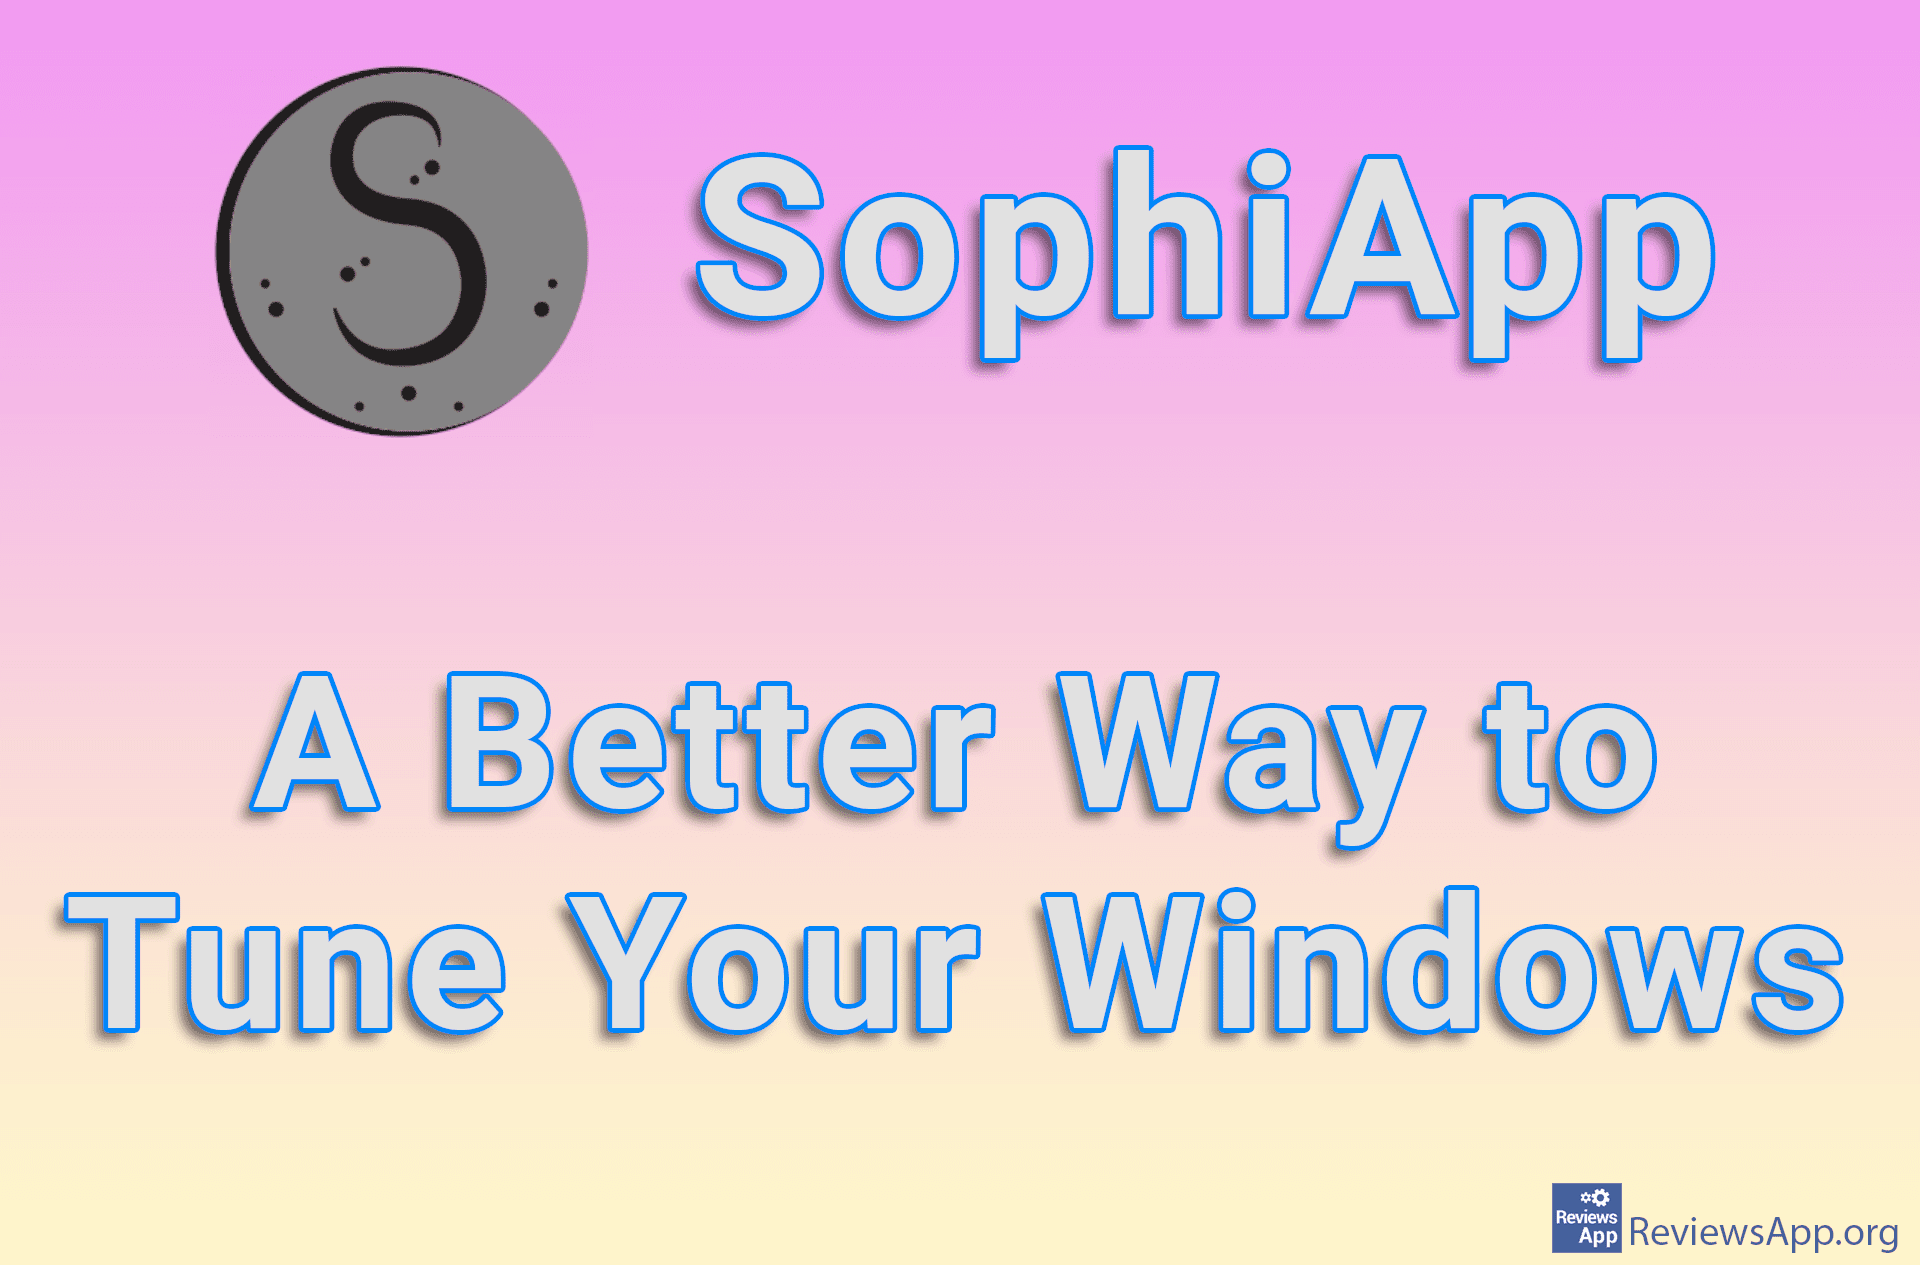 SophiApp – A Better Way to Tune Your Windows